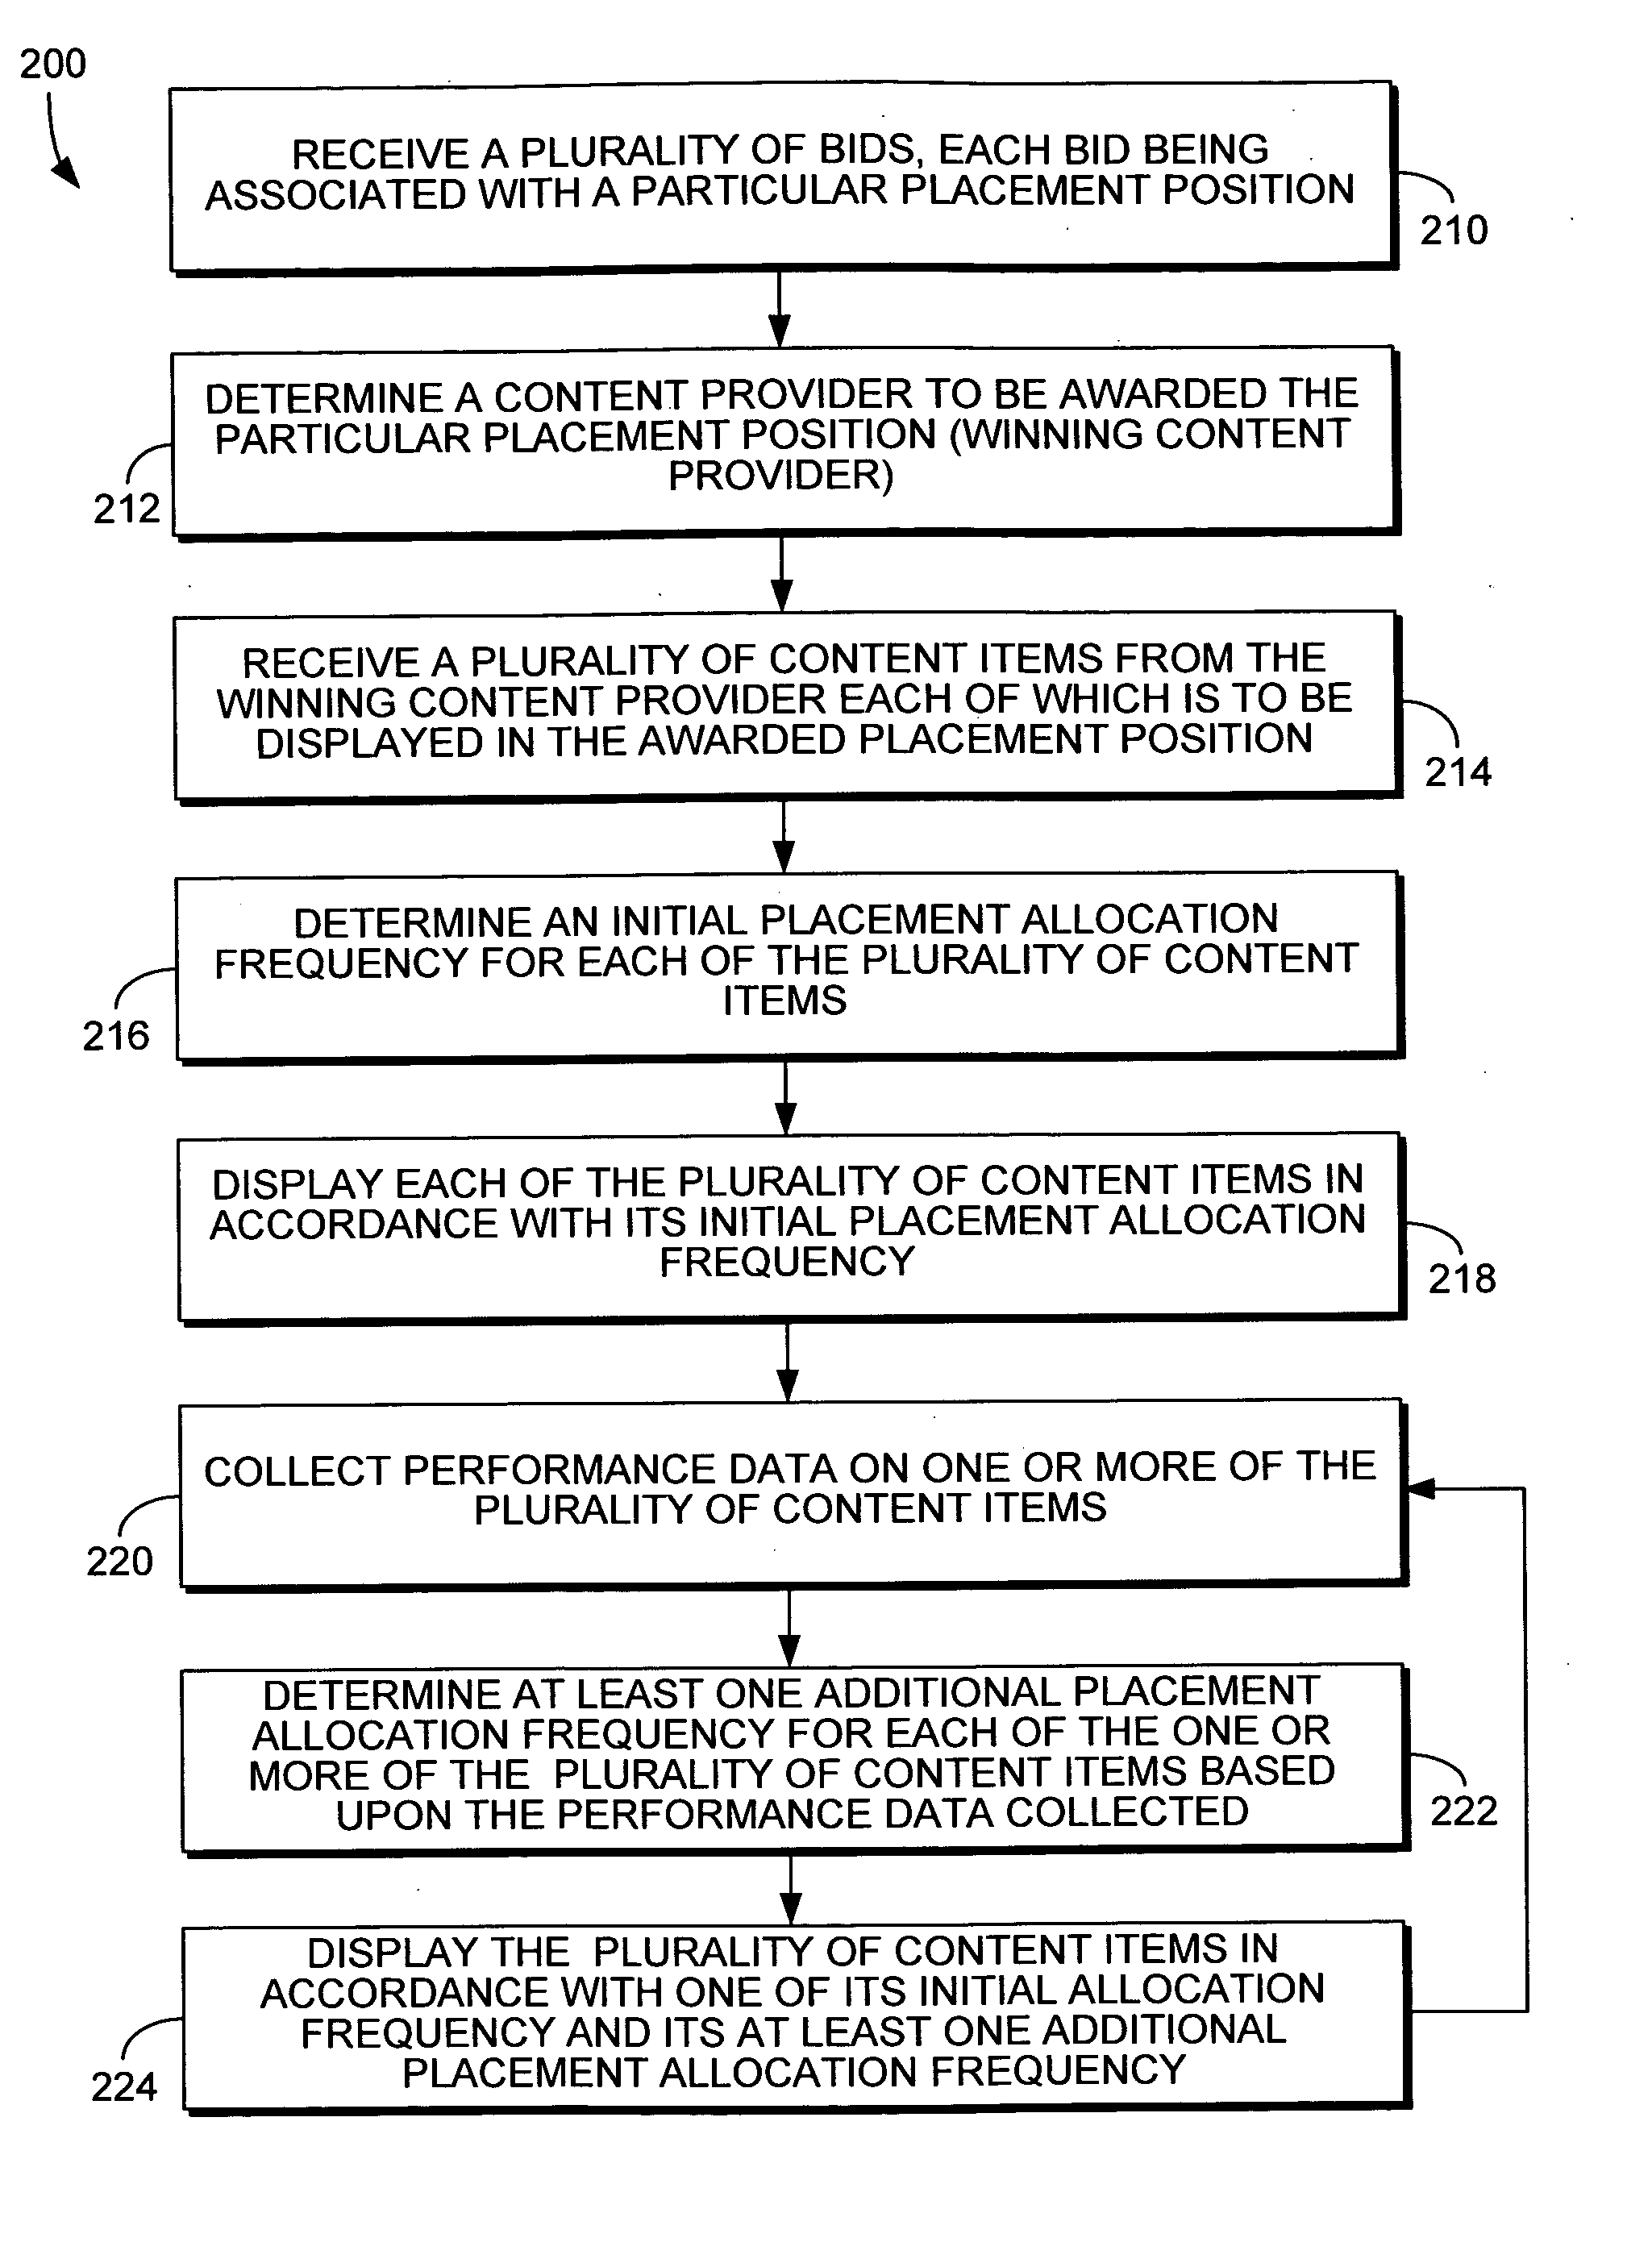 System and method for managing a plurality of content items displayed in a particular placement position on a rendered page